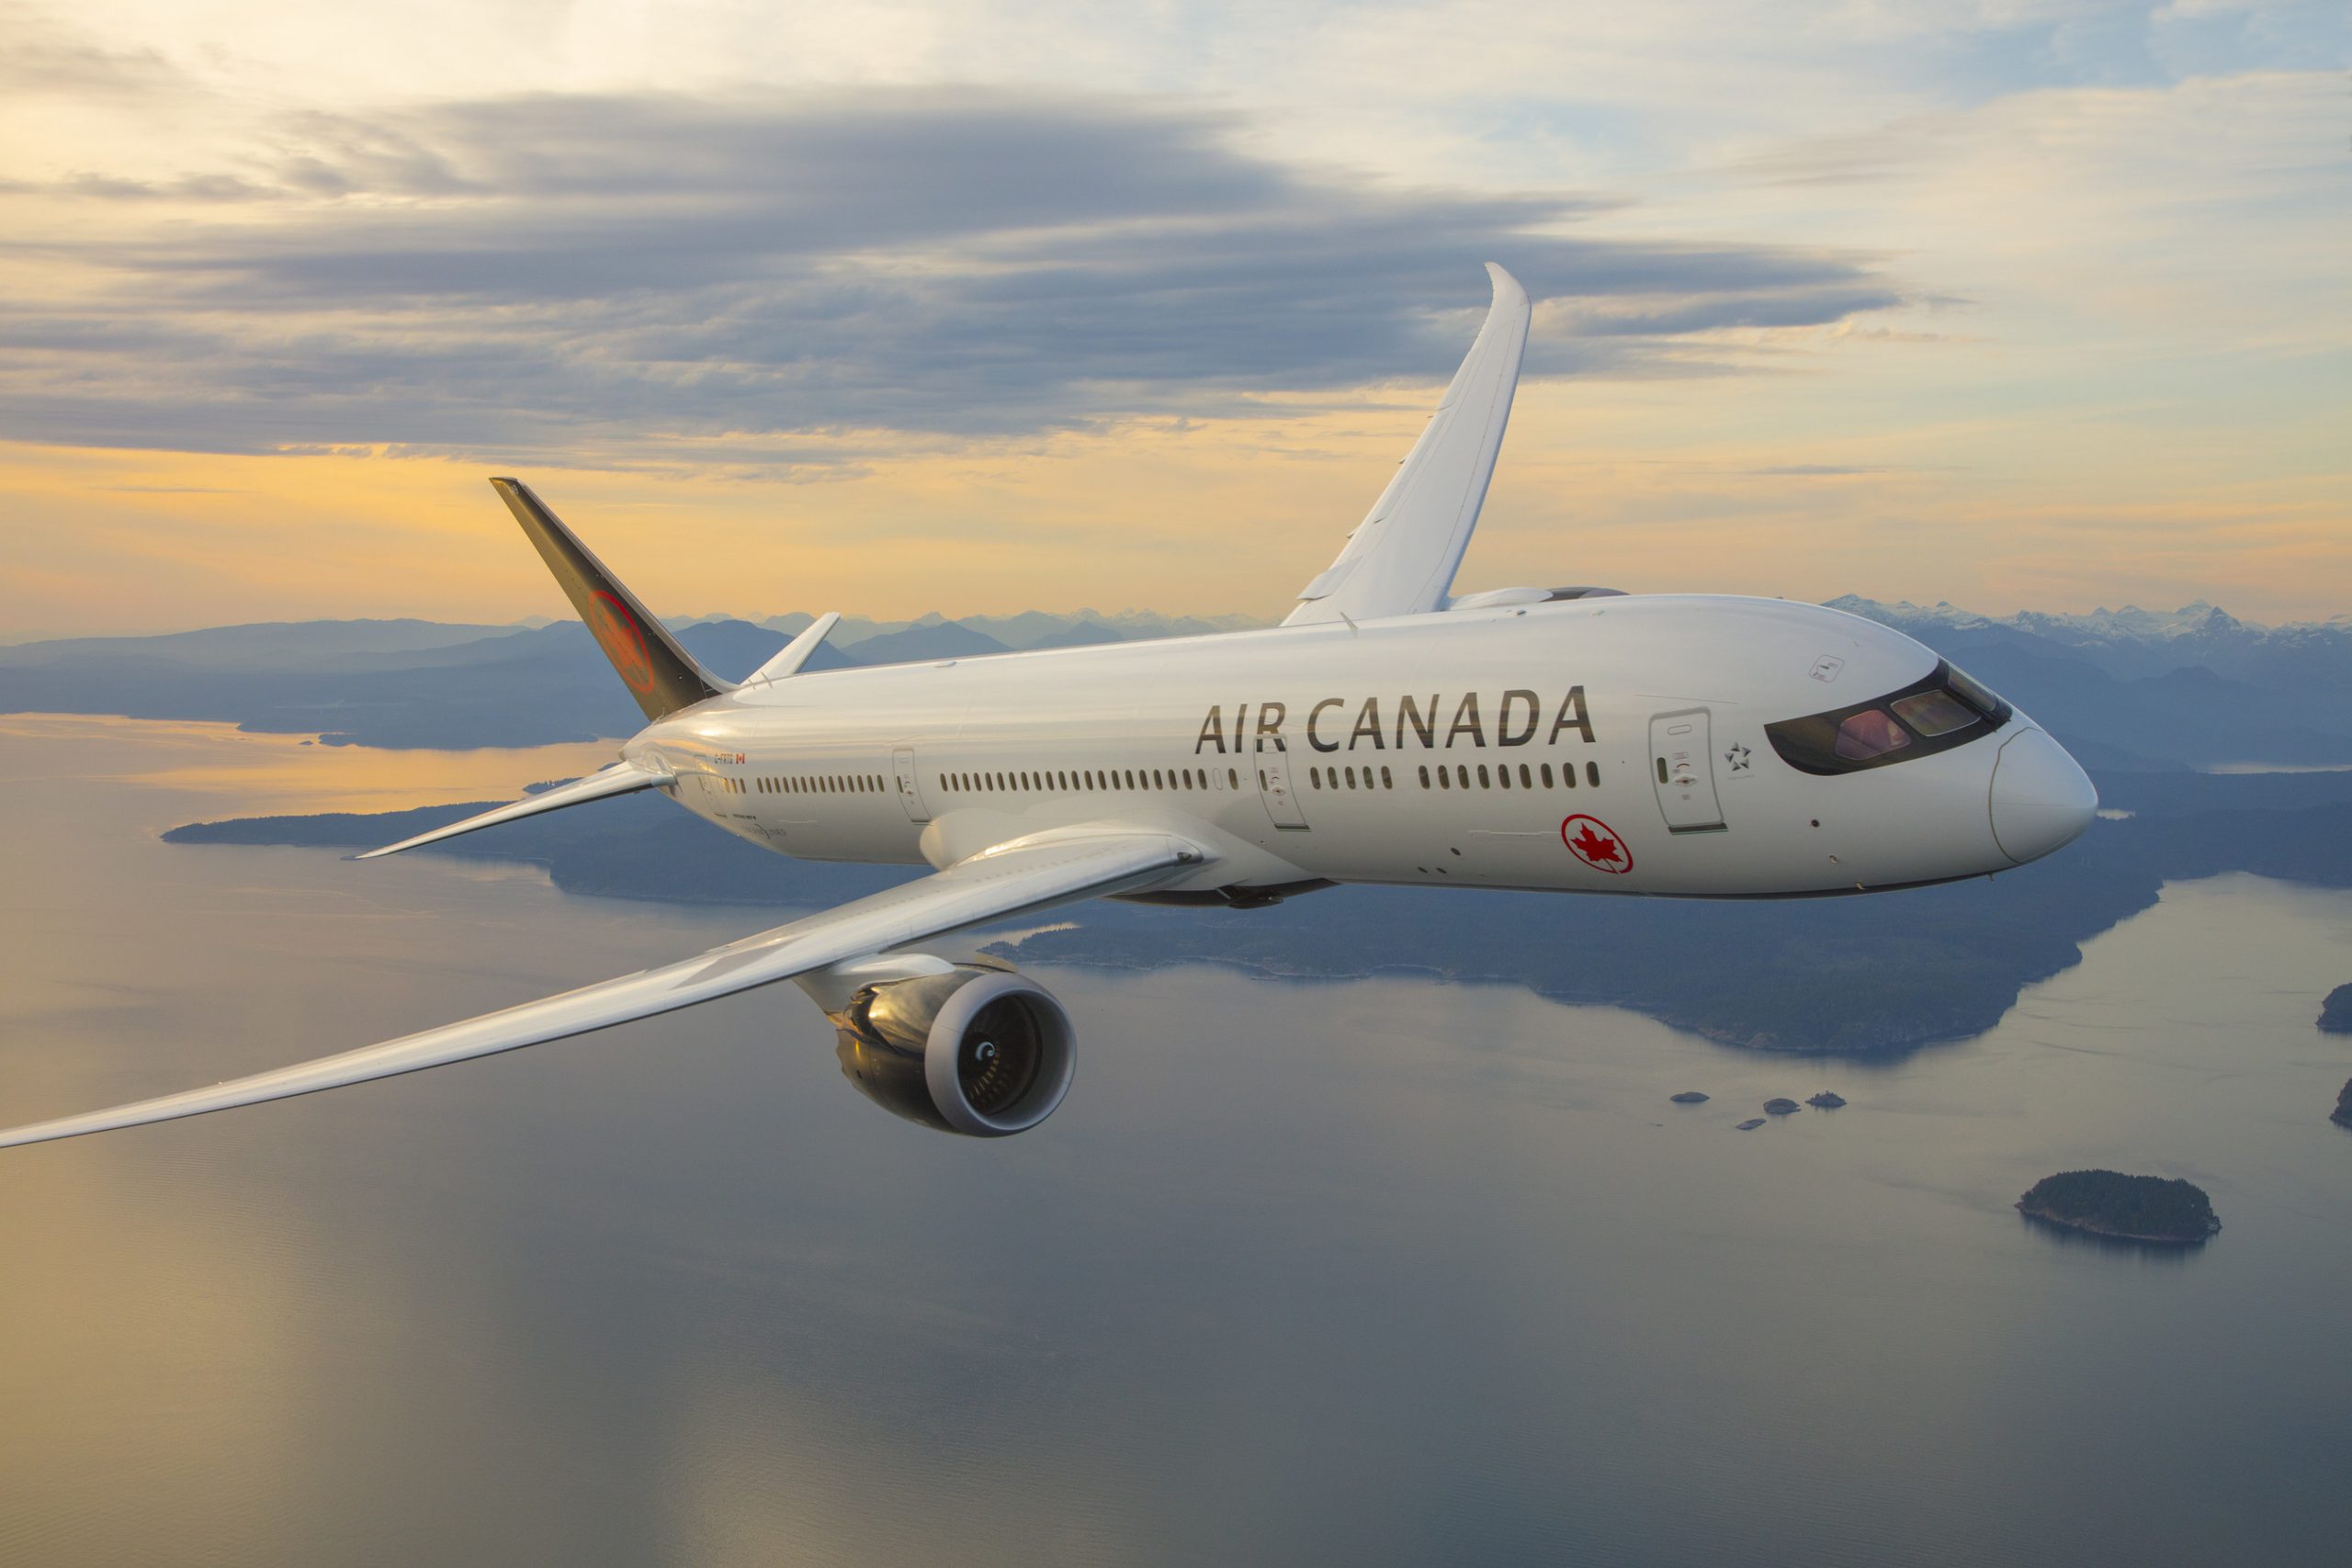 Air Canada has been recognized as the 2019 Airline of the Year by Global Traveler, the leading magazine for luxury business and leisure travellers. (CNW Group/Air Canada)